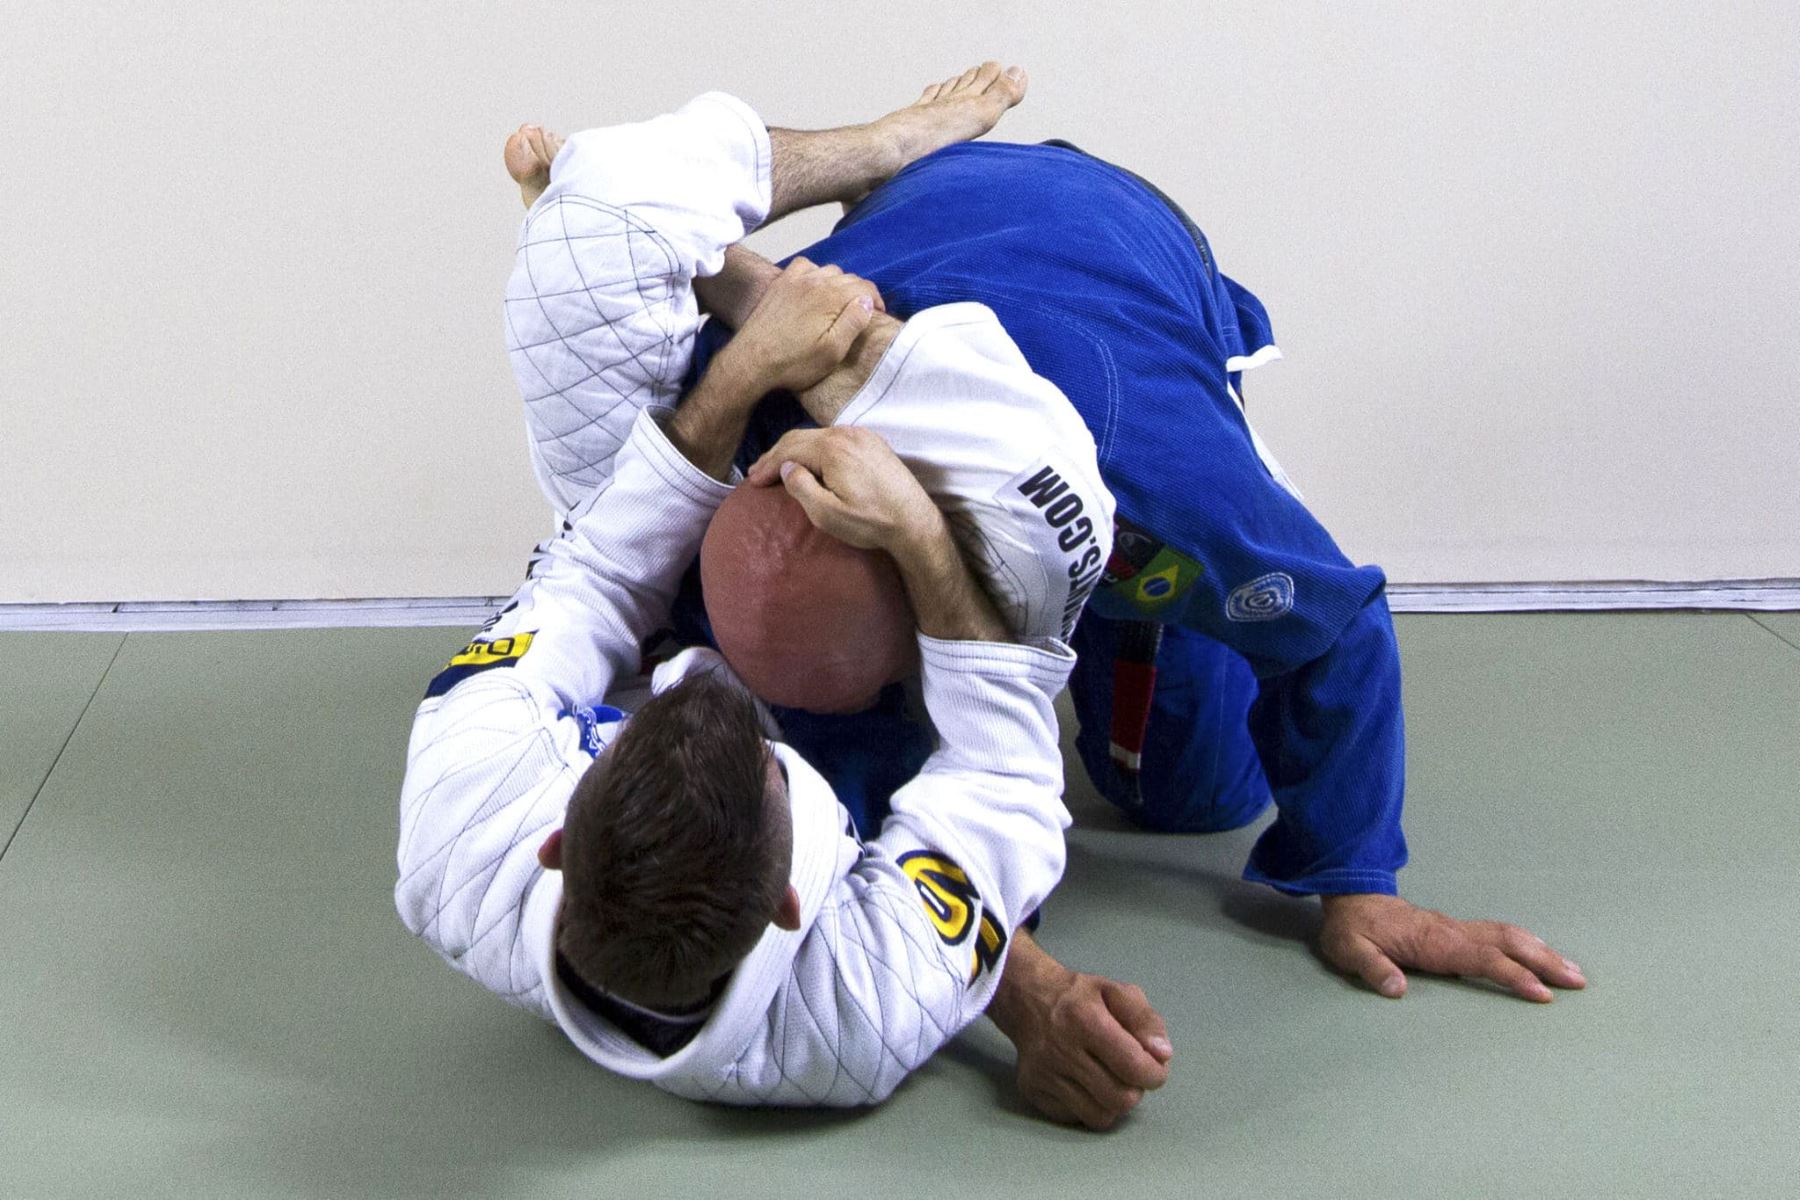 The Surprising Truth About Using Triangle Choke In Street Fights - You Won't Believe What Happens!